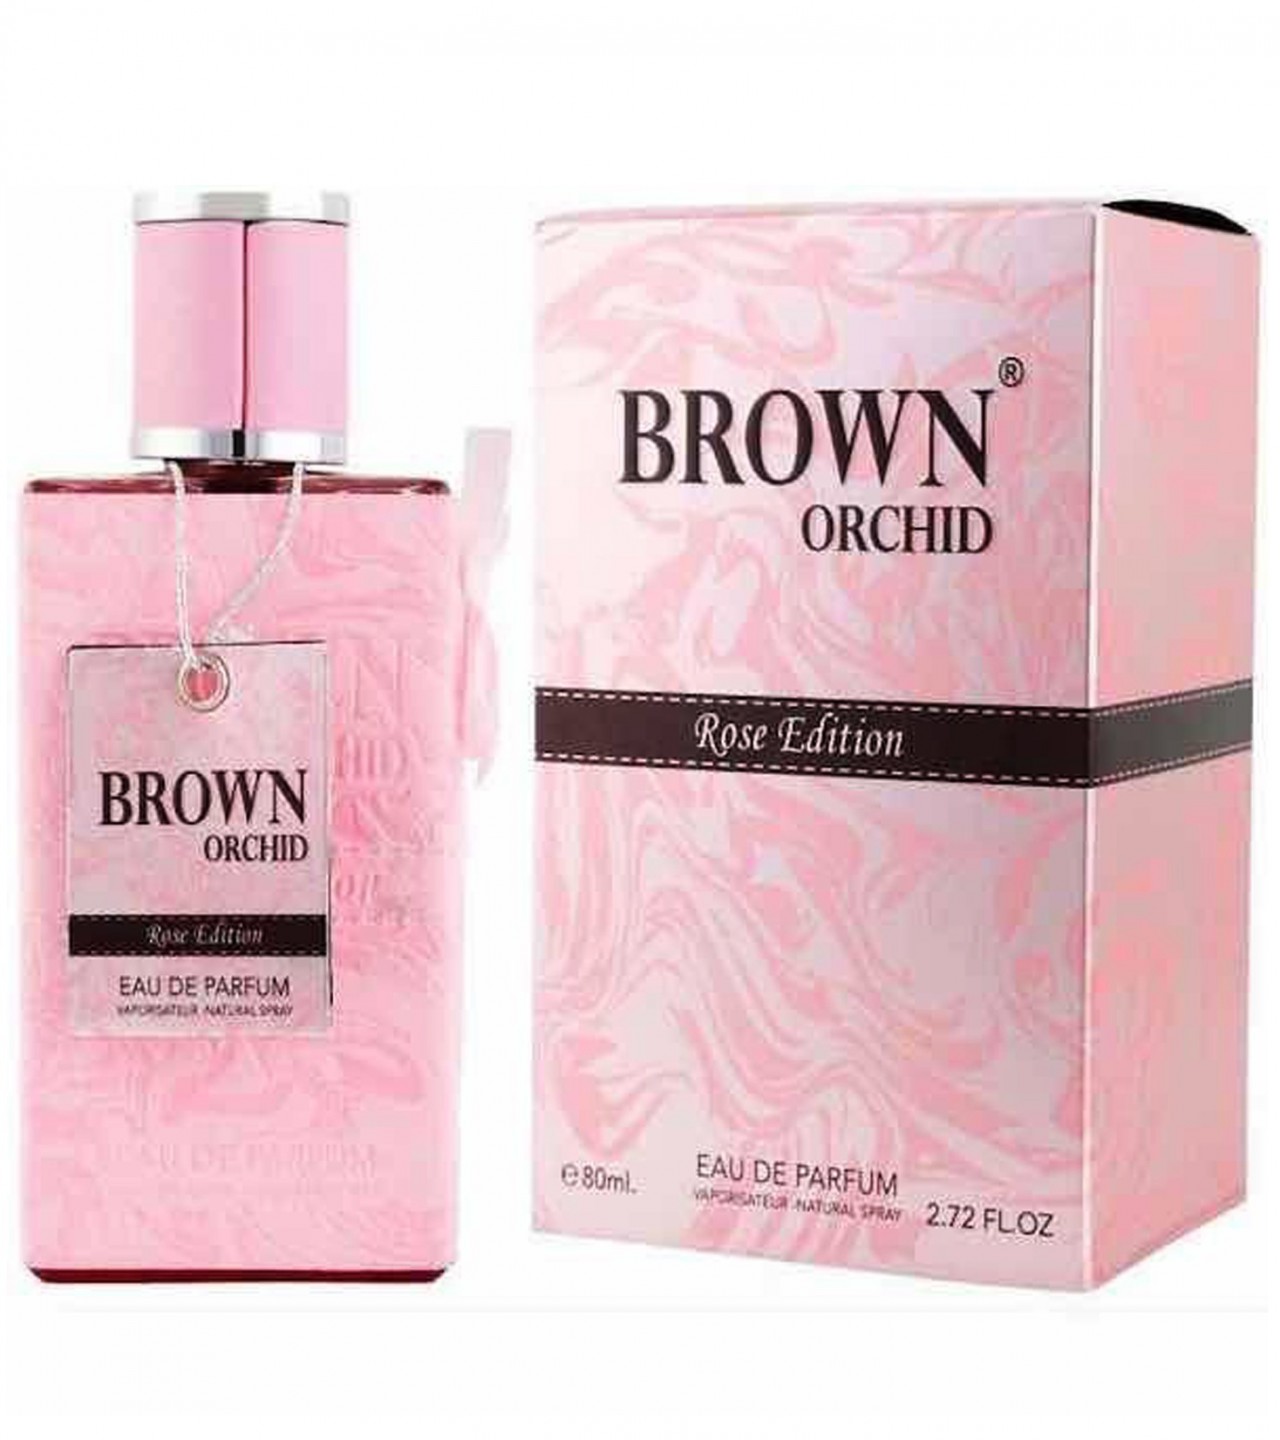 Brown Orchid Rose Edition Perfume For Women – 80 ml